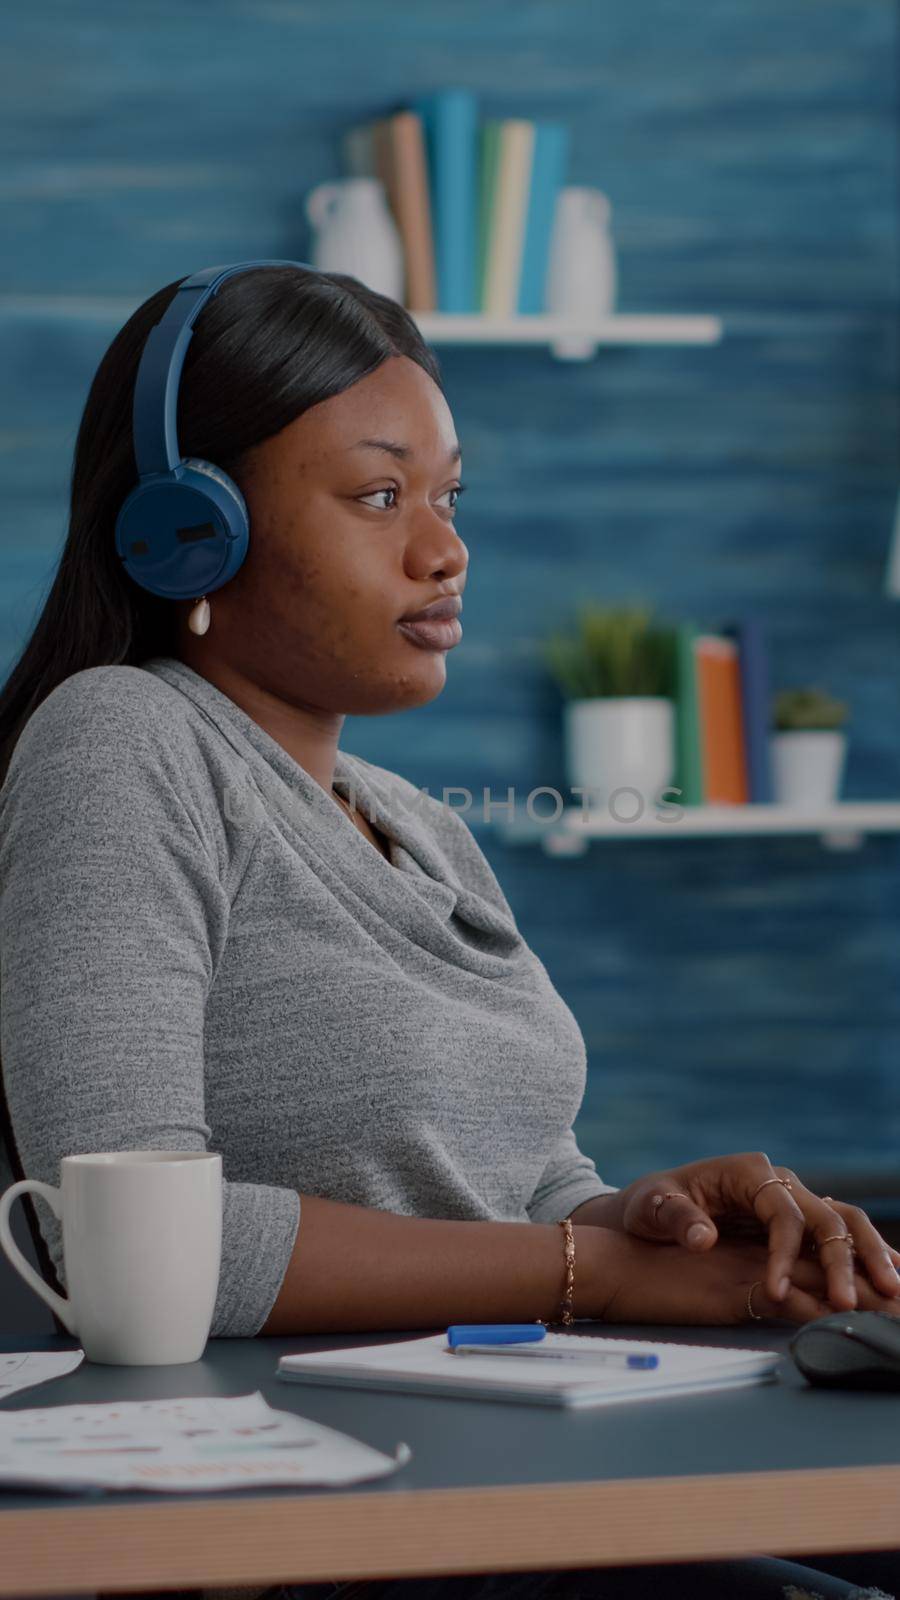 Student with black skin having headphone puts listening online univeristy course by DCStudio